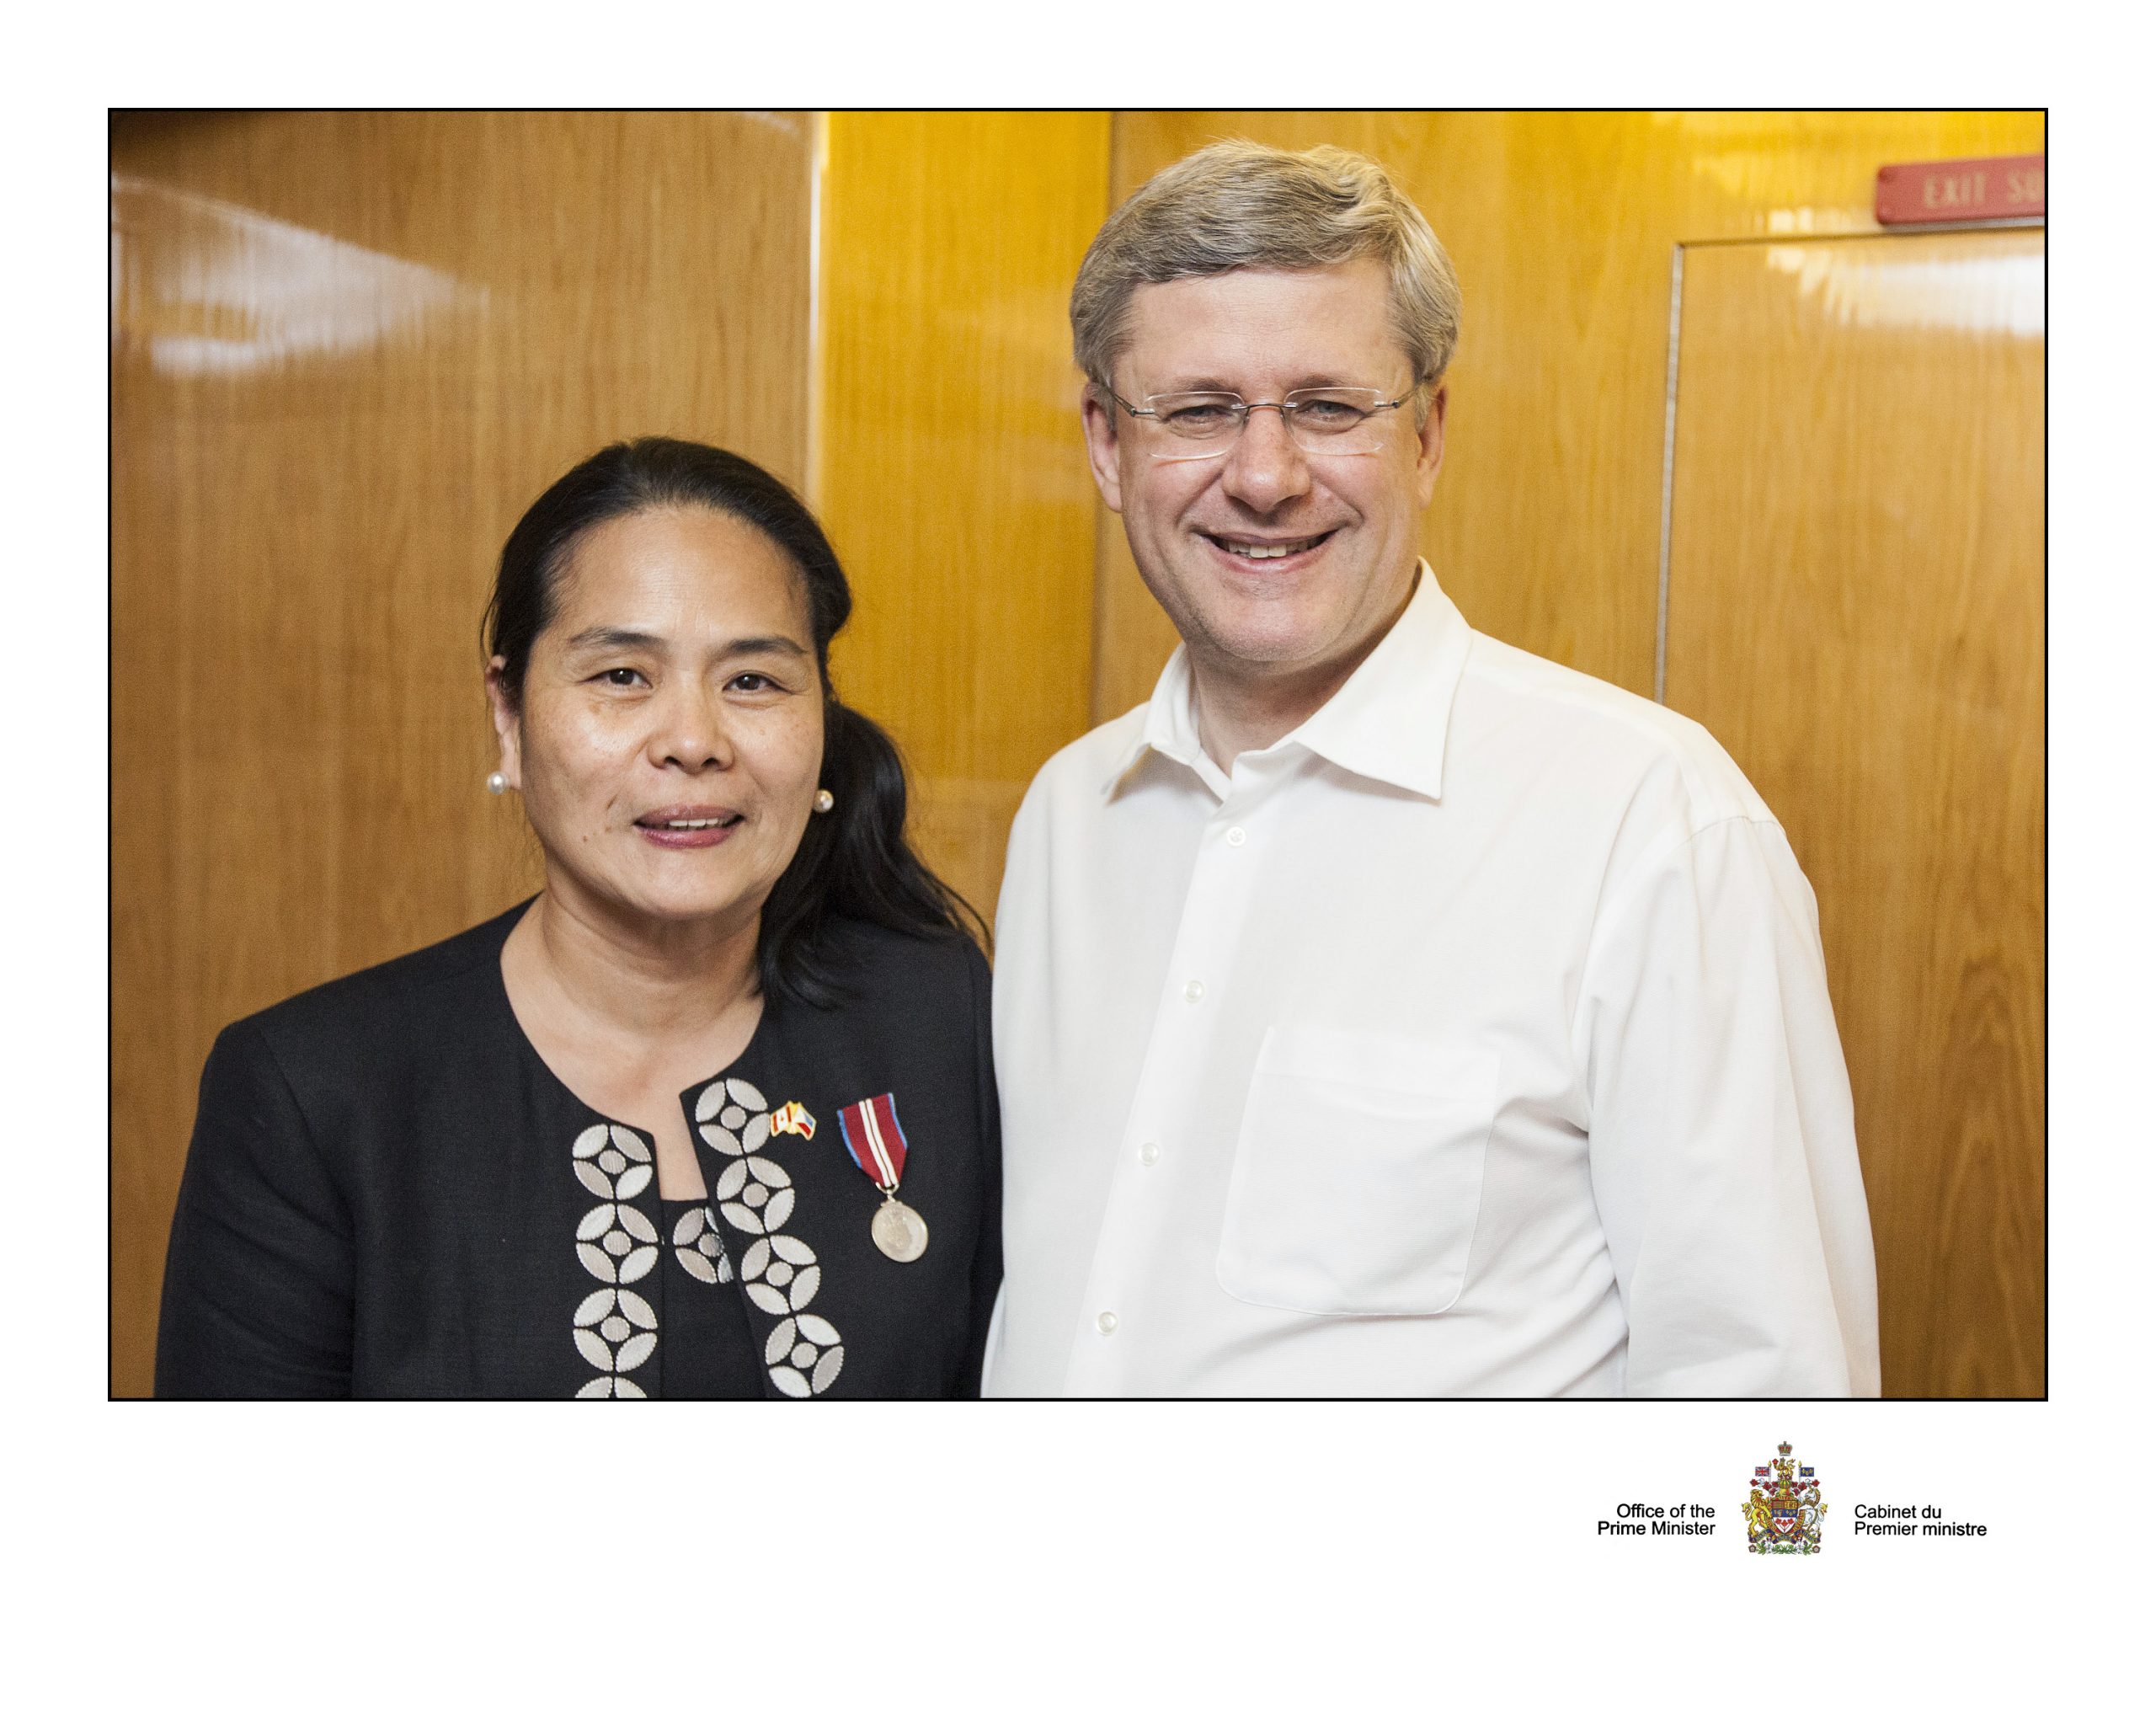 Maria Guiao with the Prime Minister of Canada